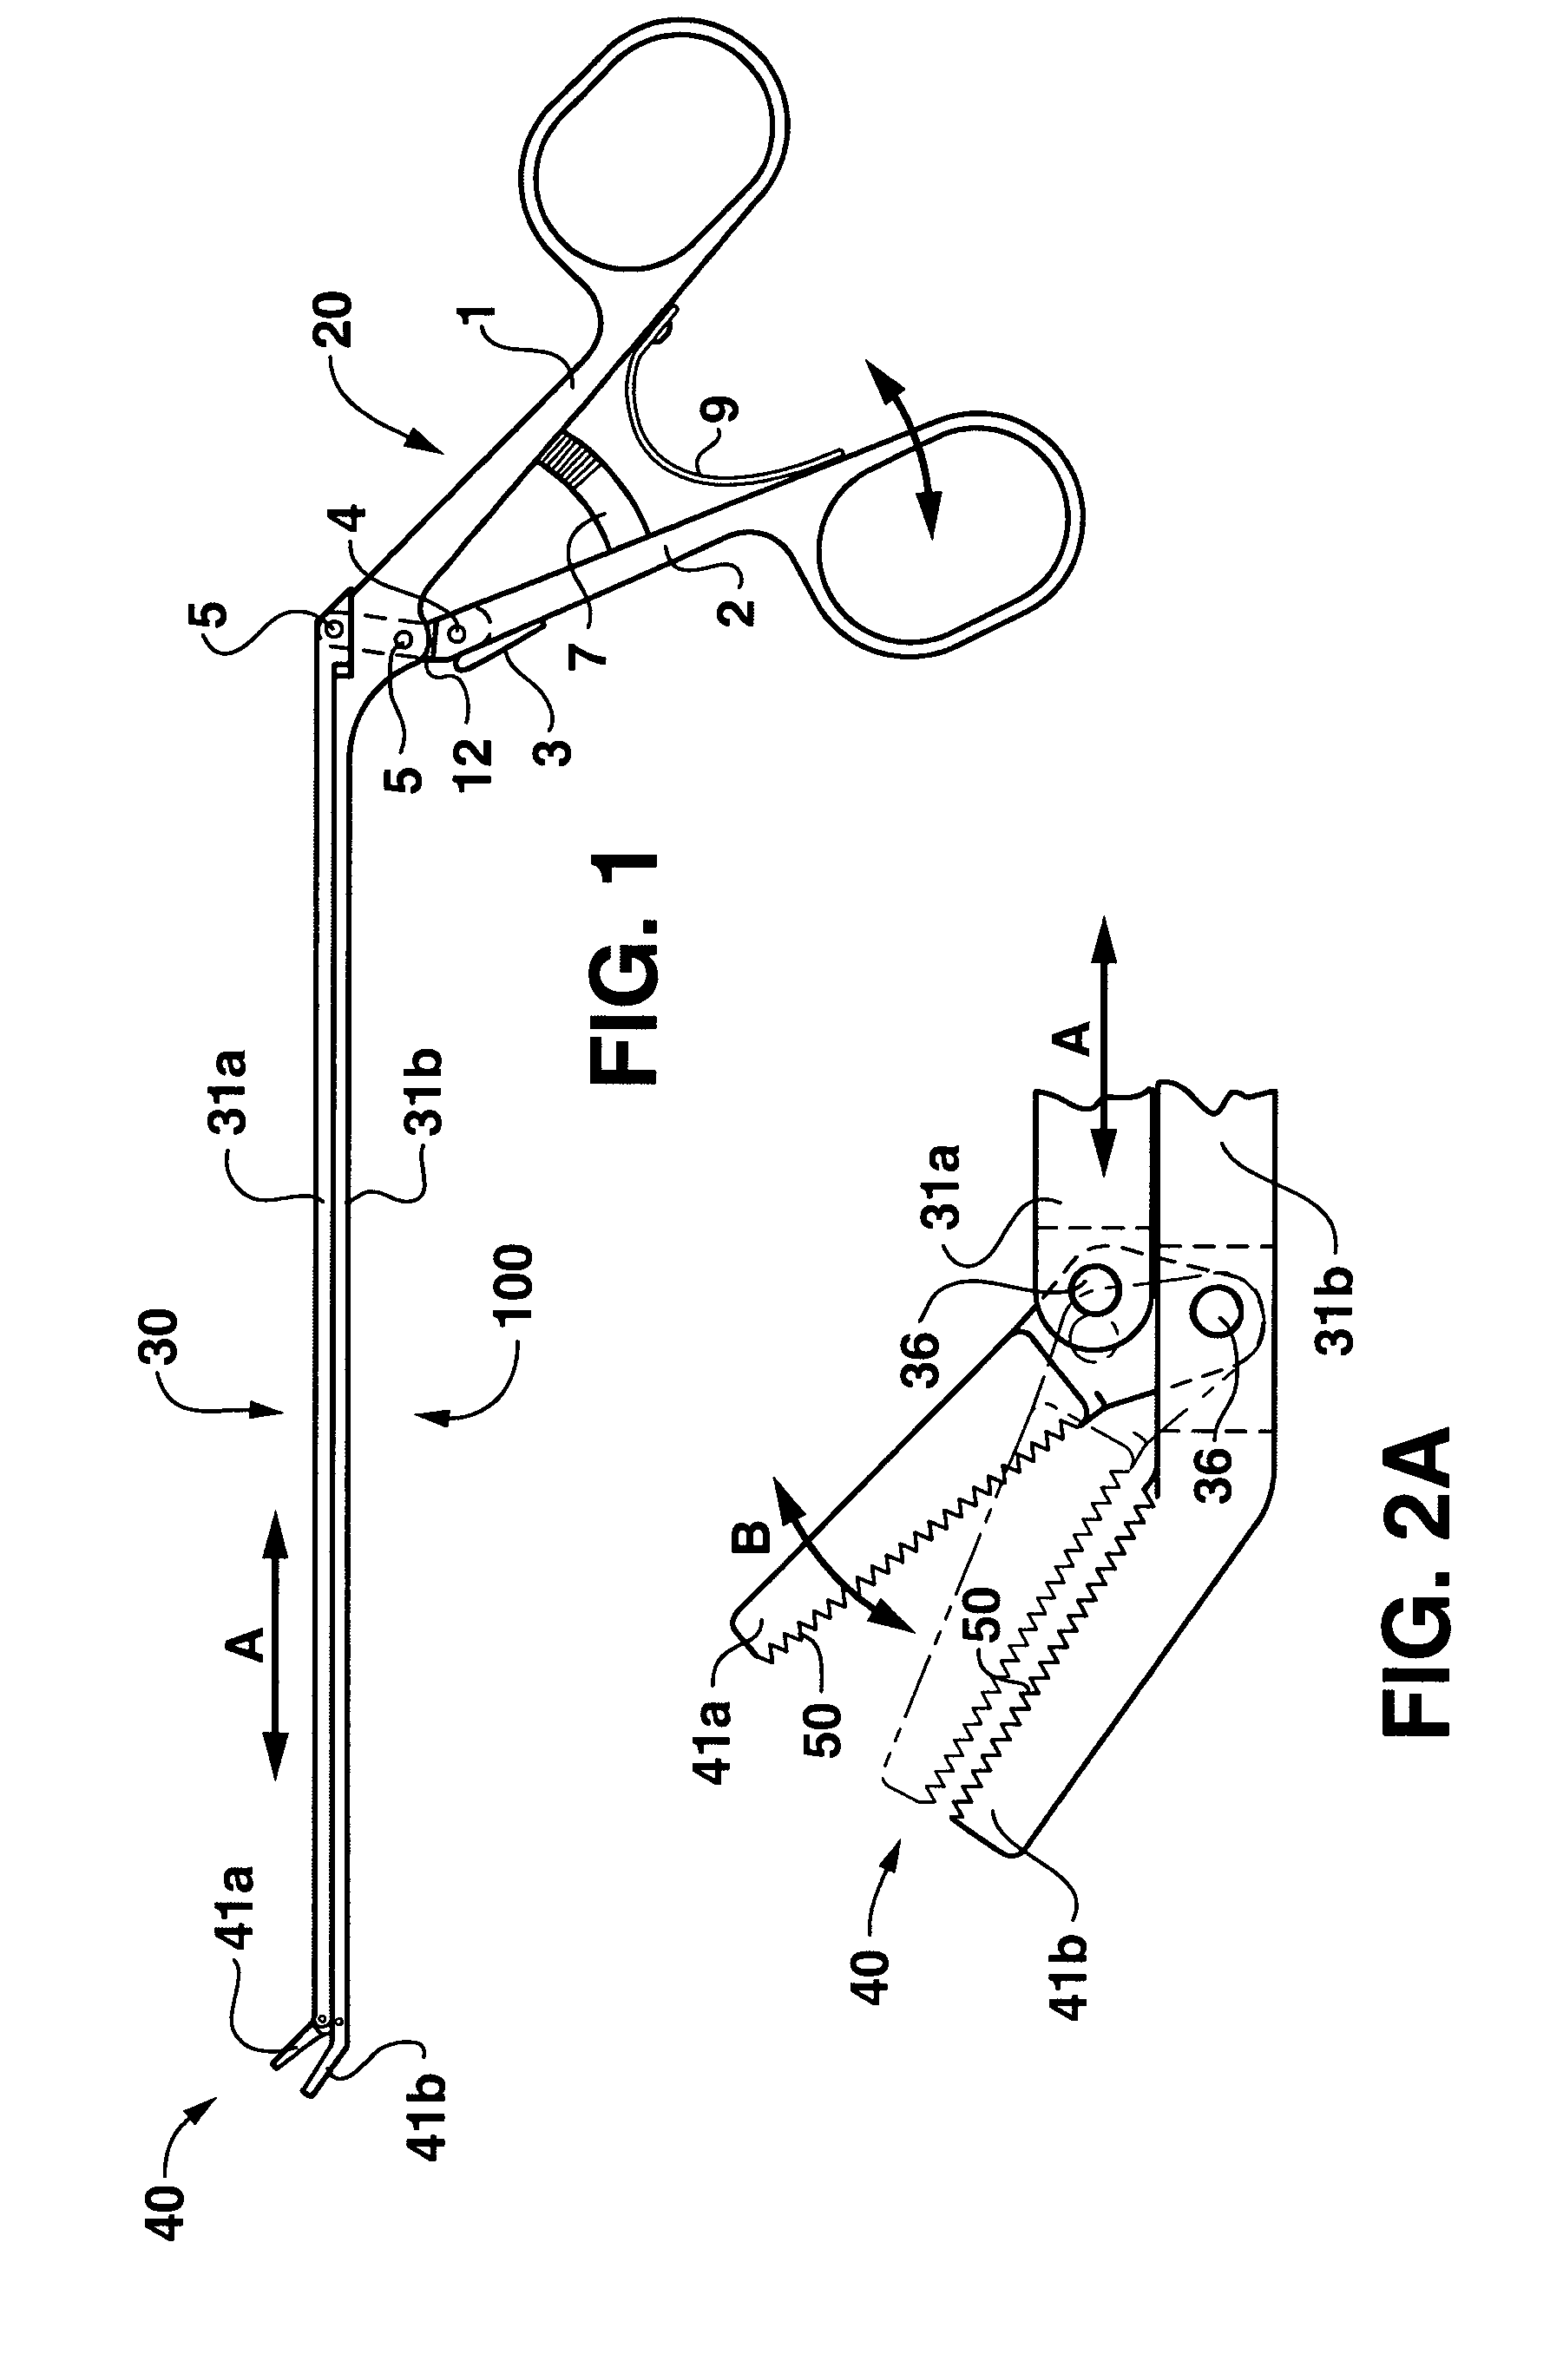 Tissue grasping instrument and method for use in arthroscopic surgery